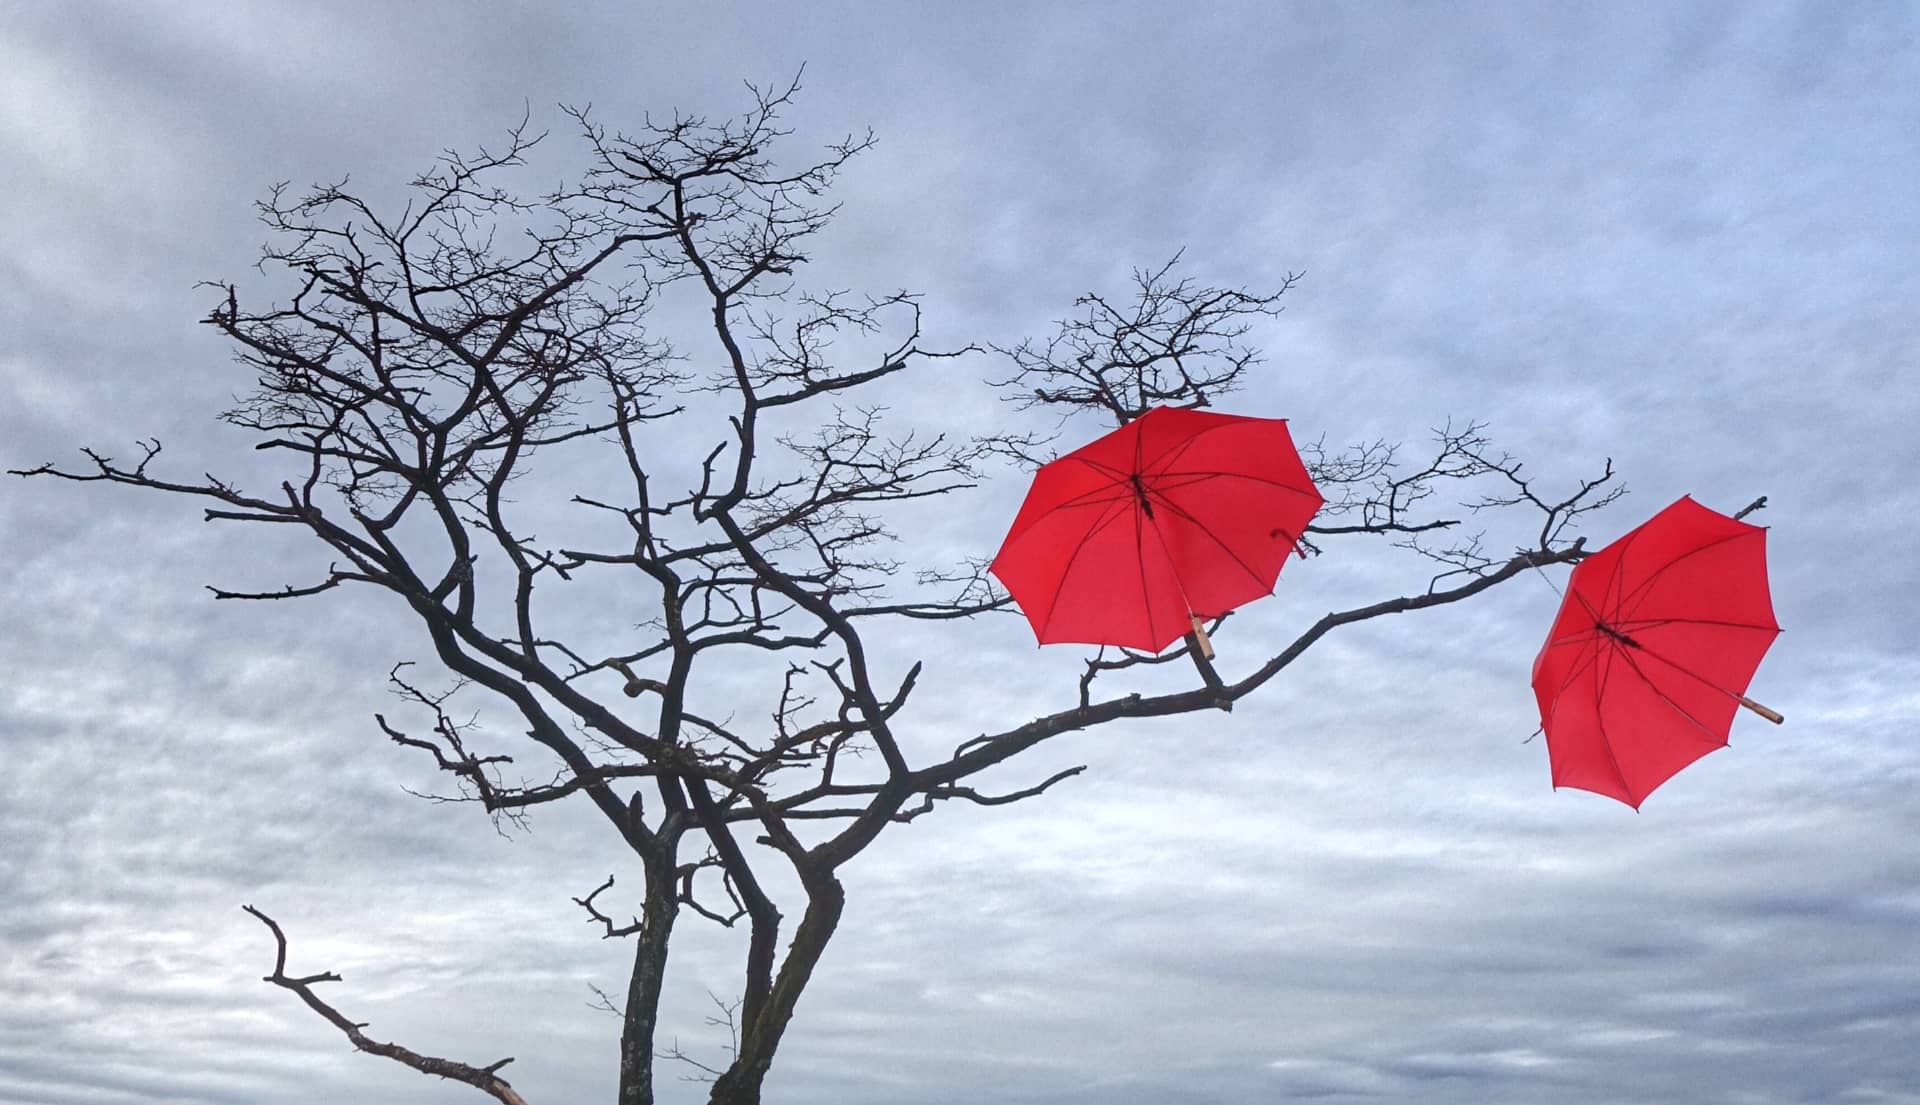 two red umbrellas stuck in tree on coast by ednawinti